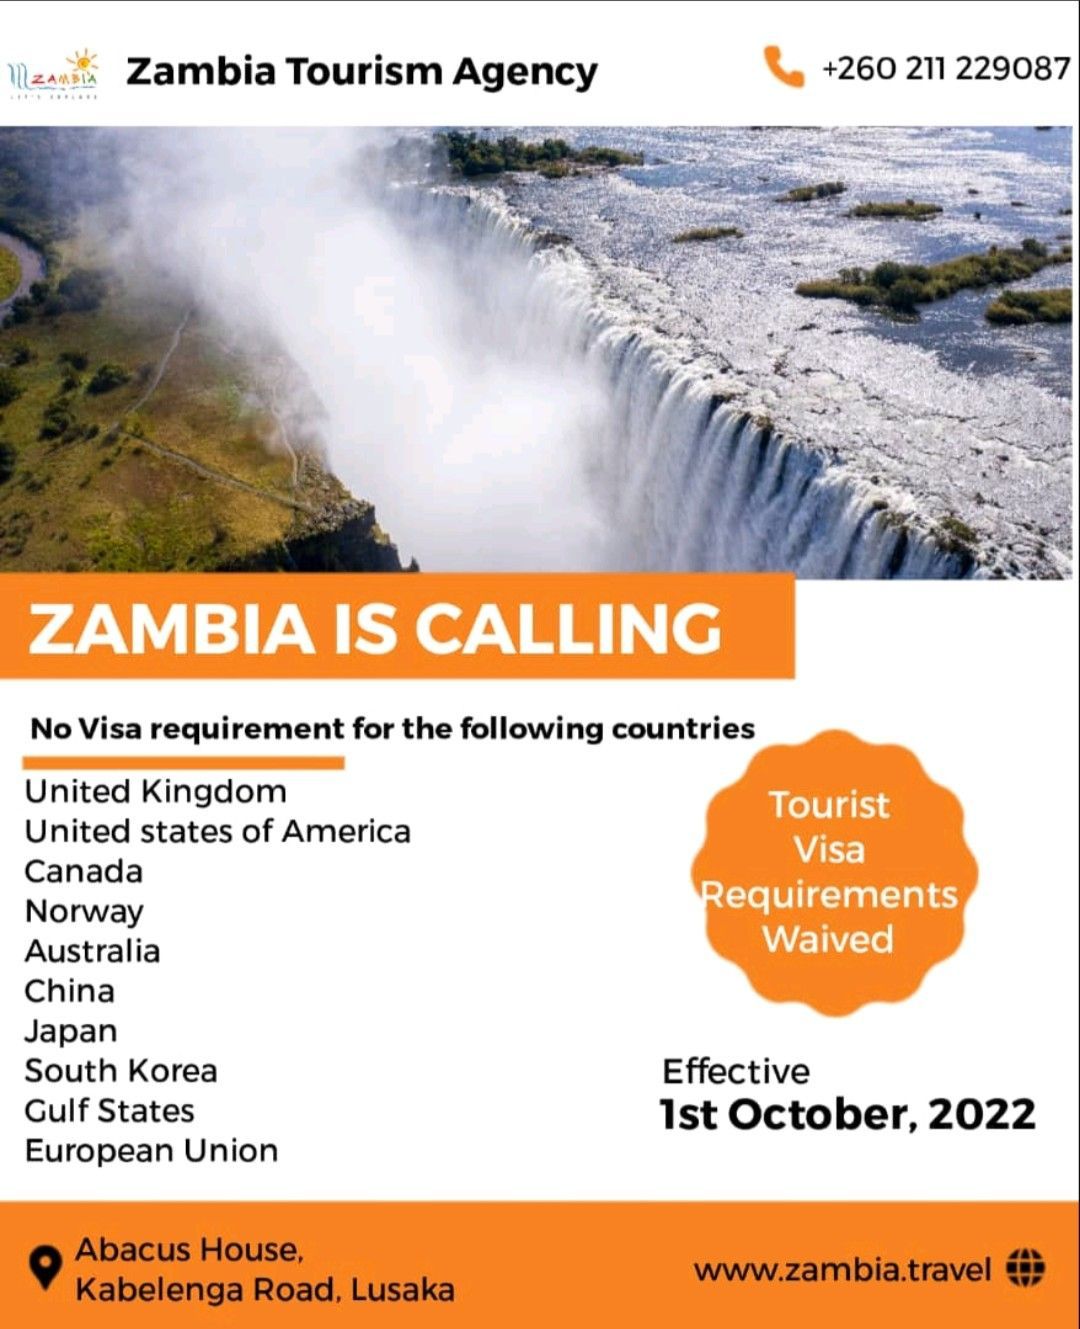 Victoria Falls tourism market: Zambia drops visa requirements for listed countries